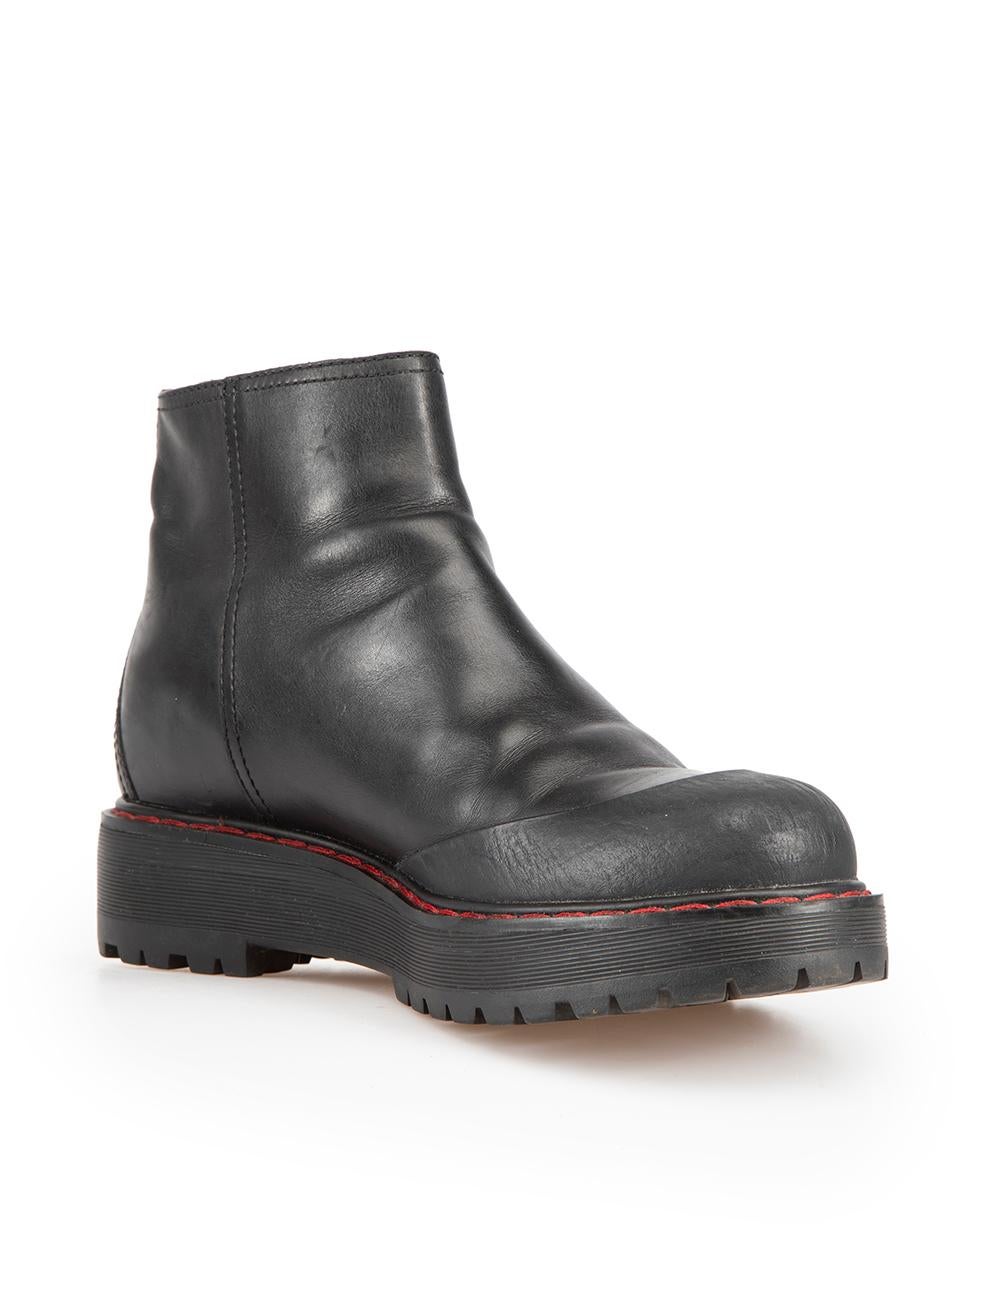 CONDITION is Very good. Minimal wear to boots is evident. Minimal wear to both boot toes, toe-caps and the left-side of the right boot with scratches and abrasions to the leather on this used Prada designer resale item.

Details
Black
Leather
Ankle